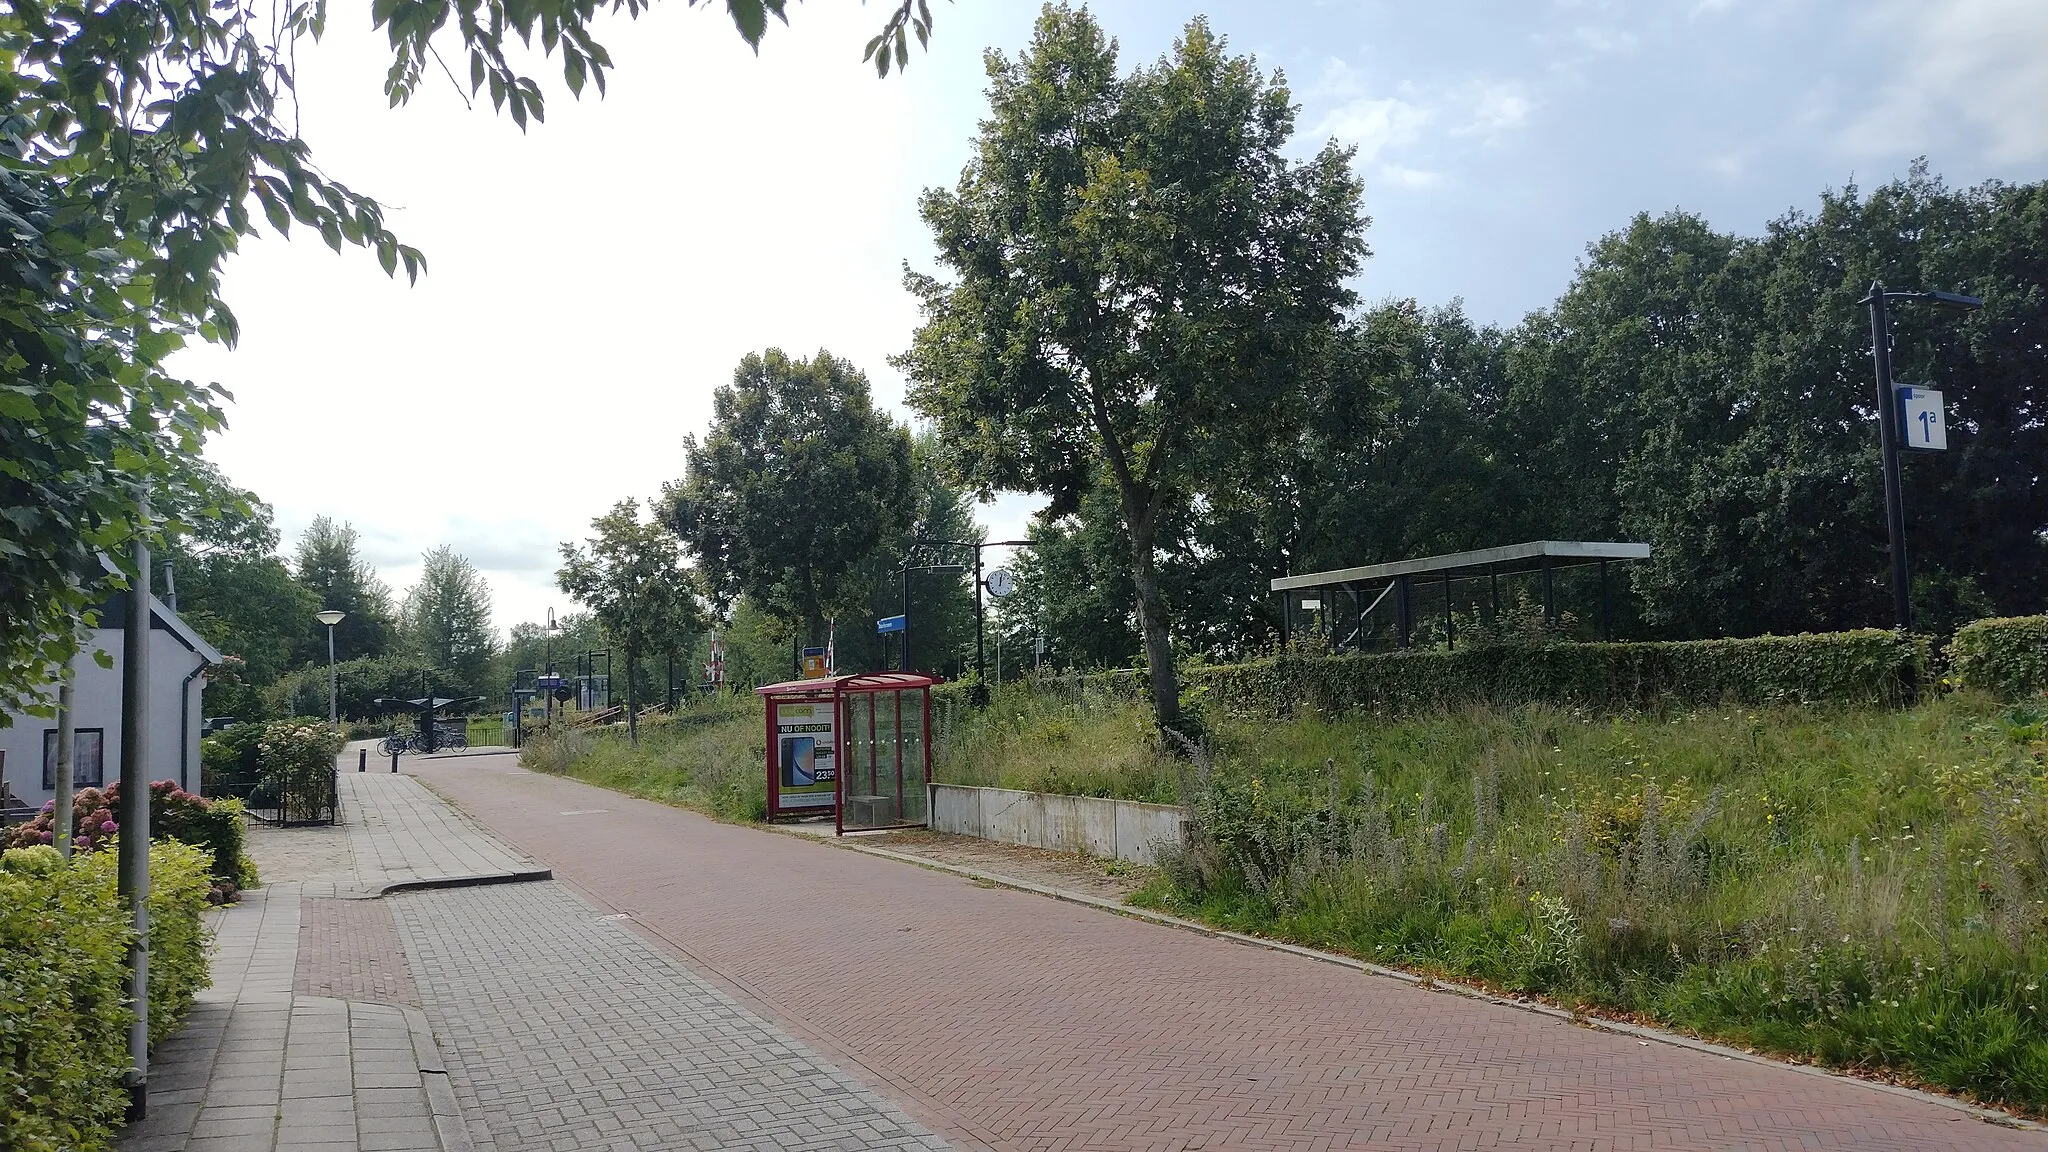 Photo showing: Platform 1b of Daarlerveen station, seen from the road.